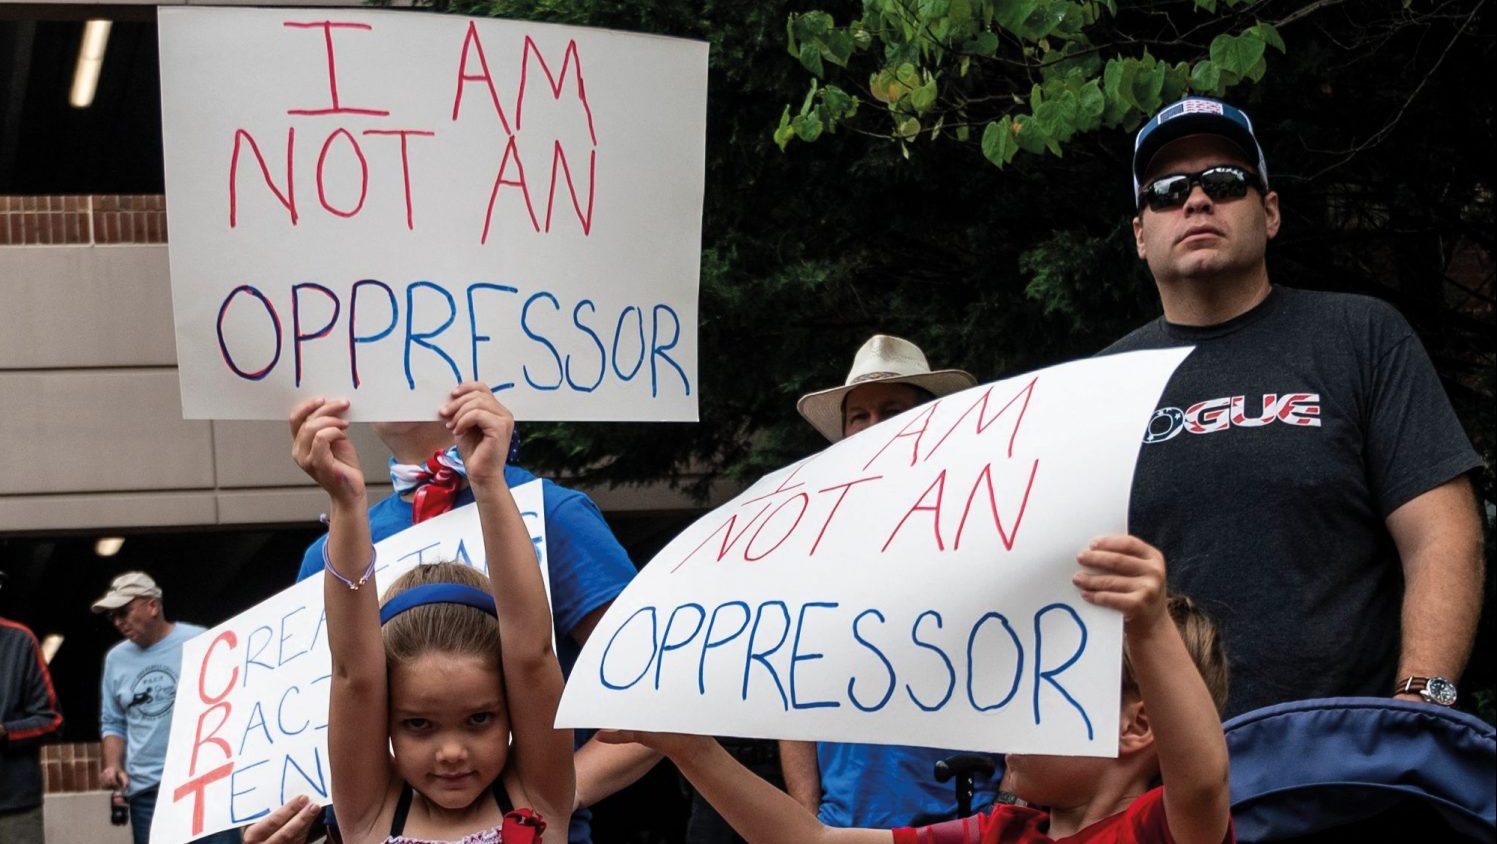 Children in Virginia protest against Critical Race Theory claiming it teaches white people to see themselves oppressors of Black Americans. Photo: ANDREW CABALLERO-REYNOLDS/ AFP via Getty Images.